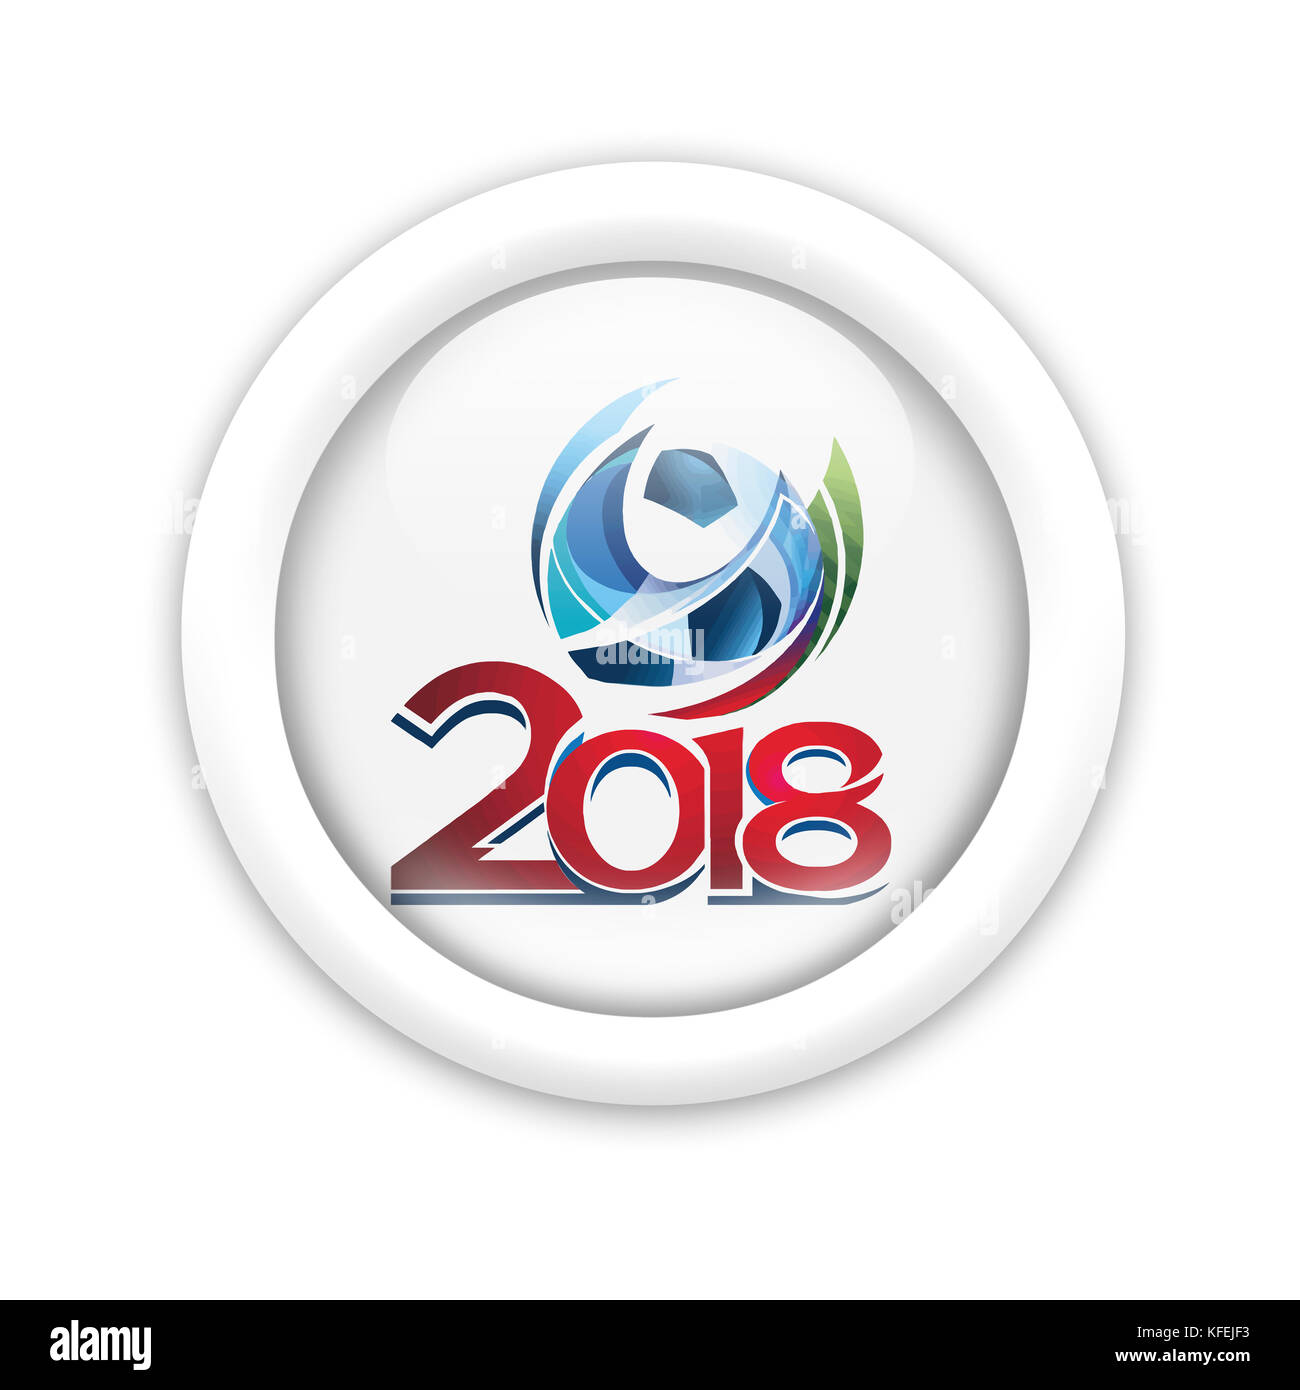 Fifa logo Stock Vector Images - Alamy